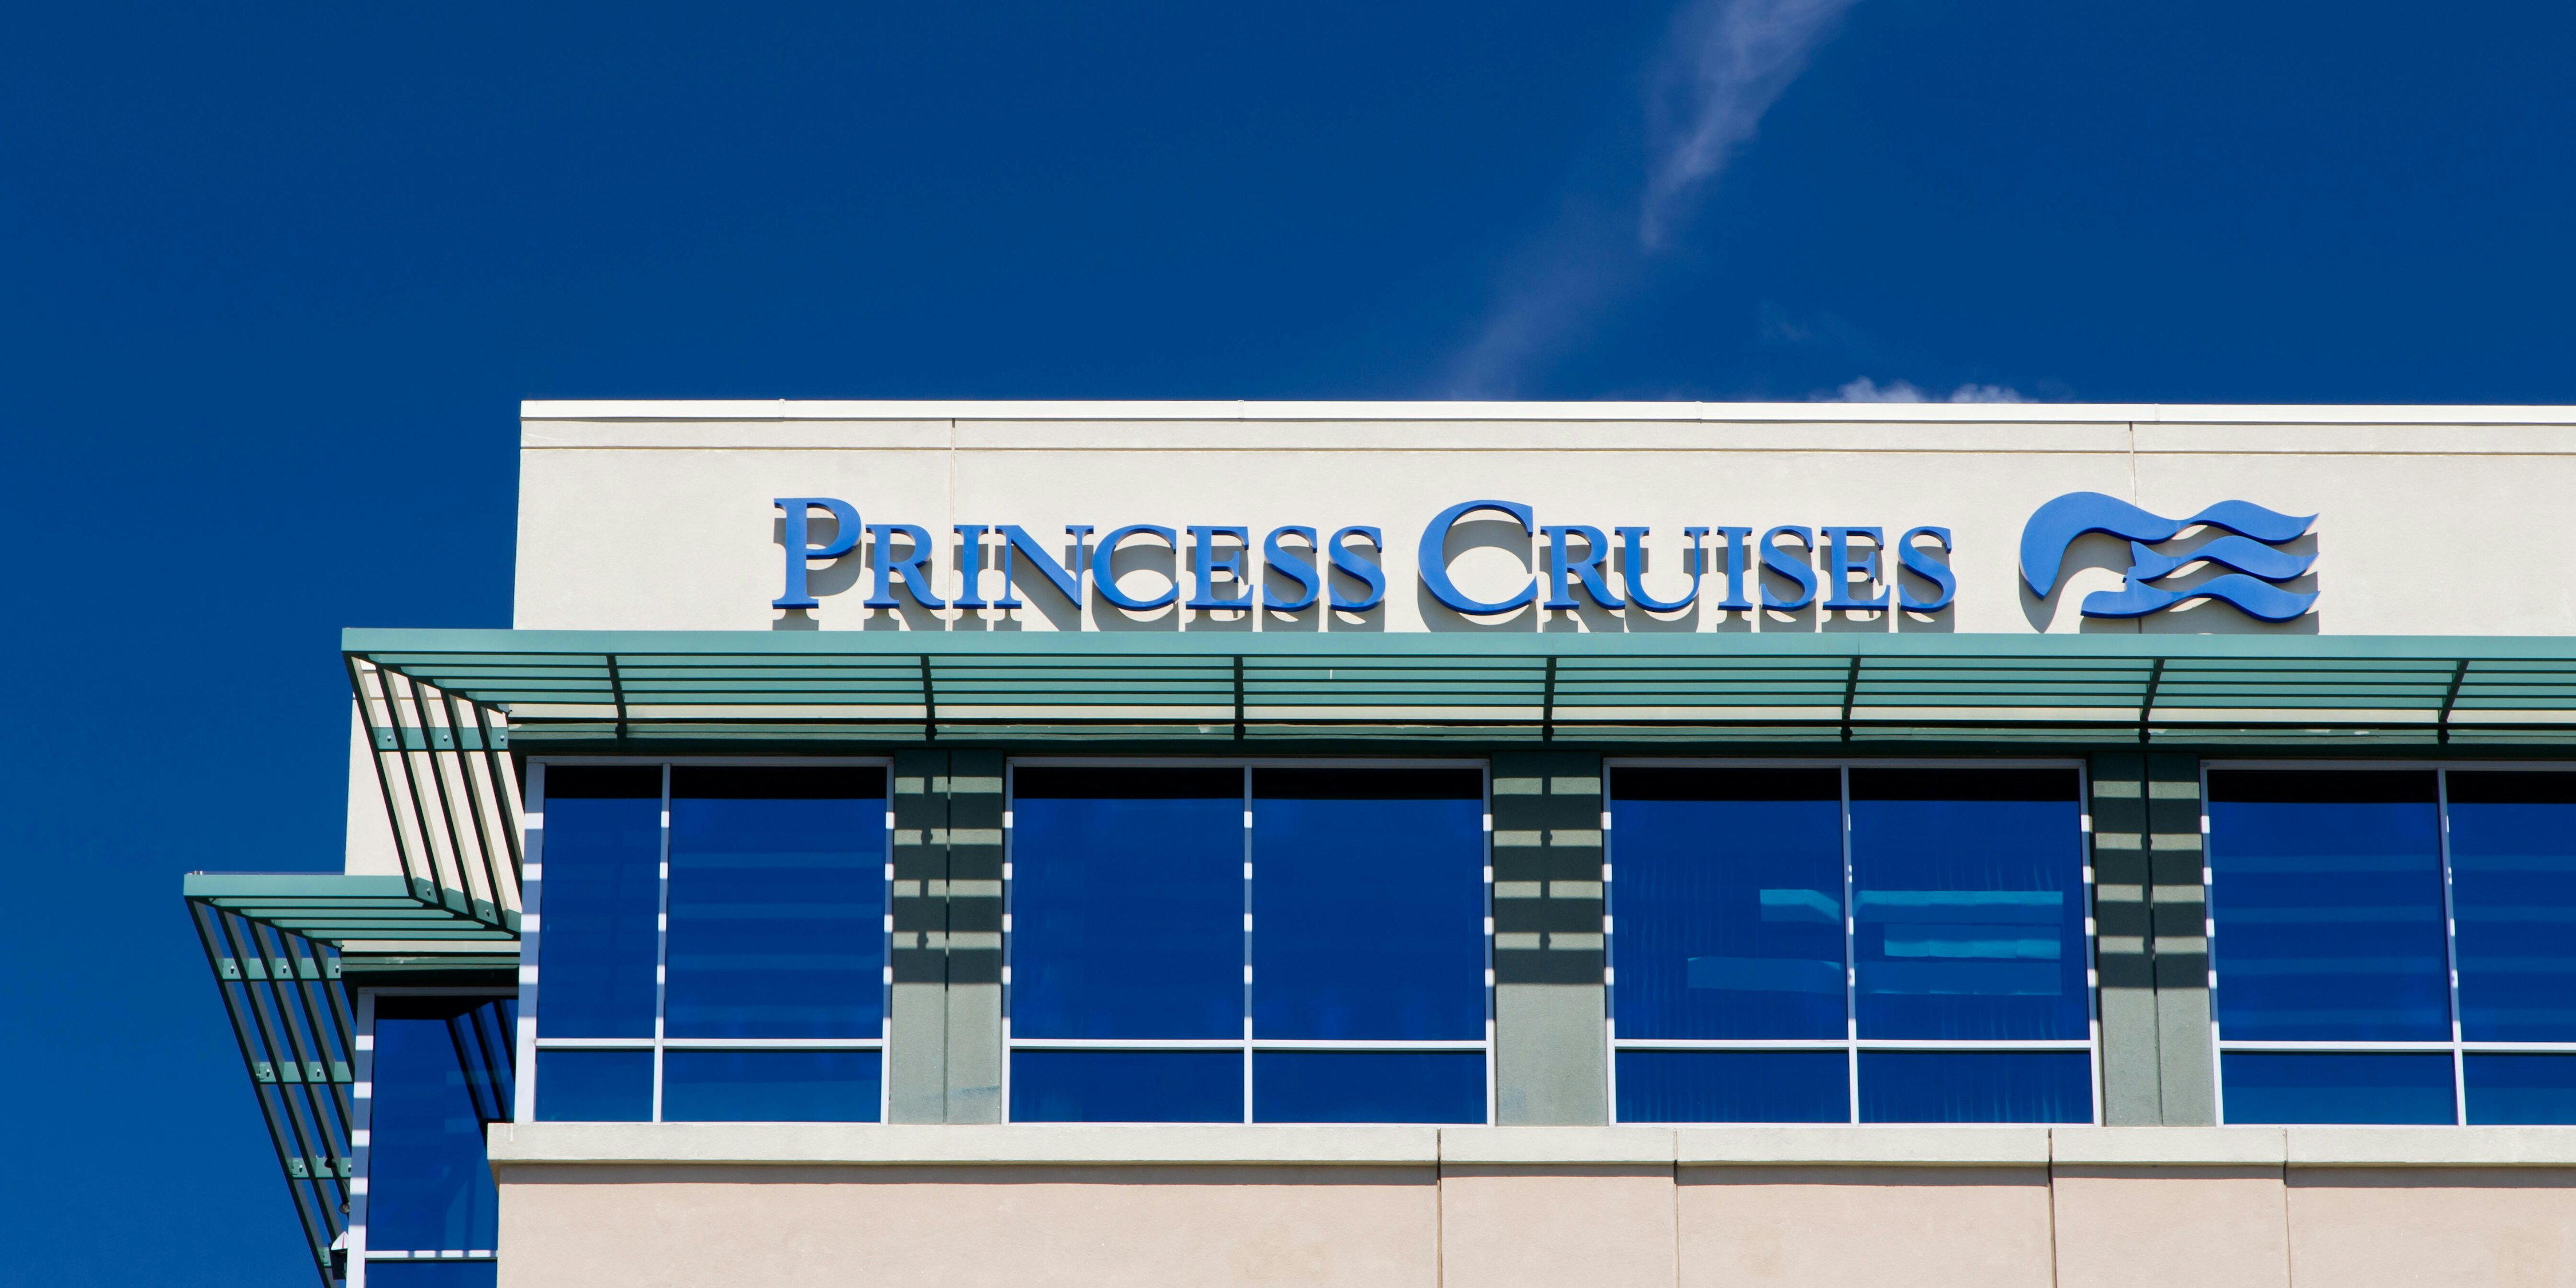 princess cruise lines office telephone number